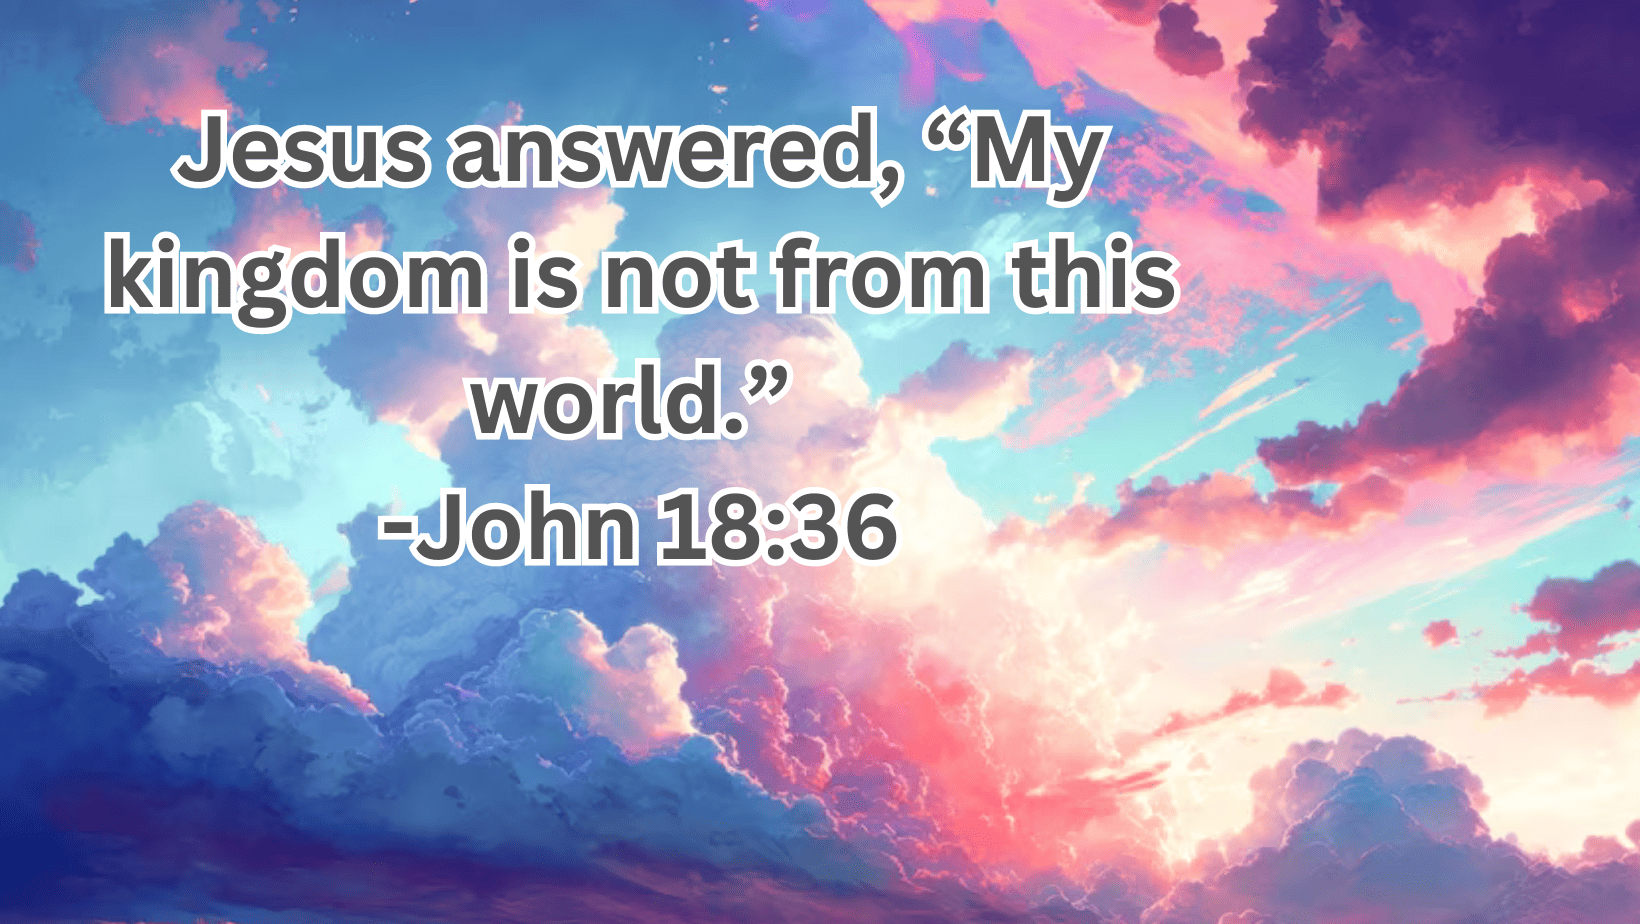 Jesus answered, “My kingdom is not from this world.